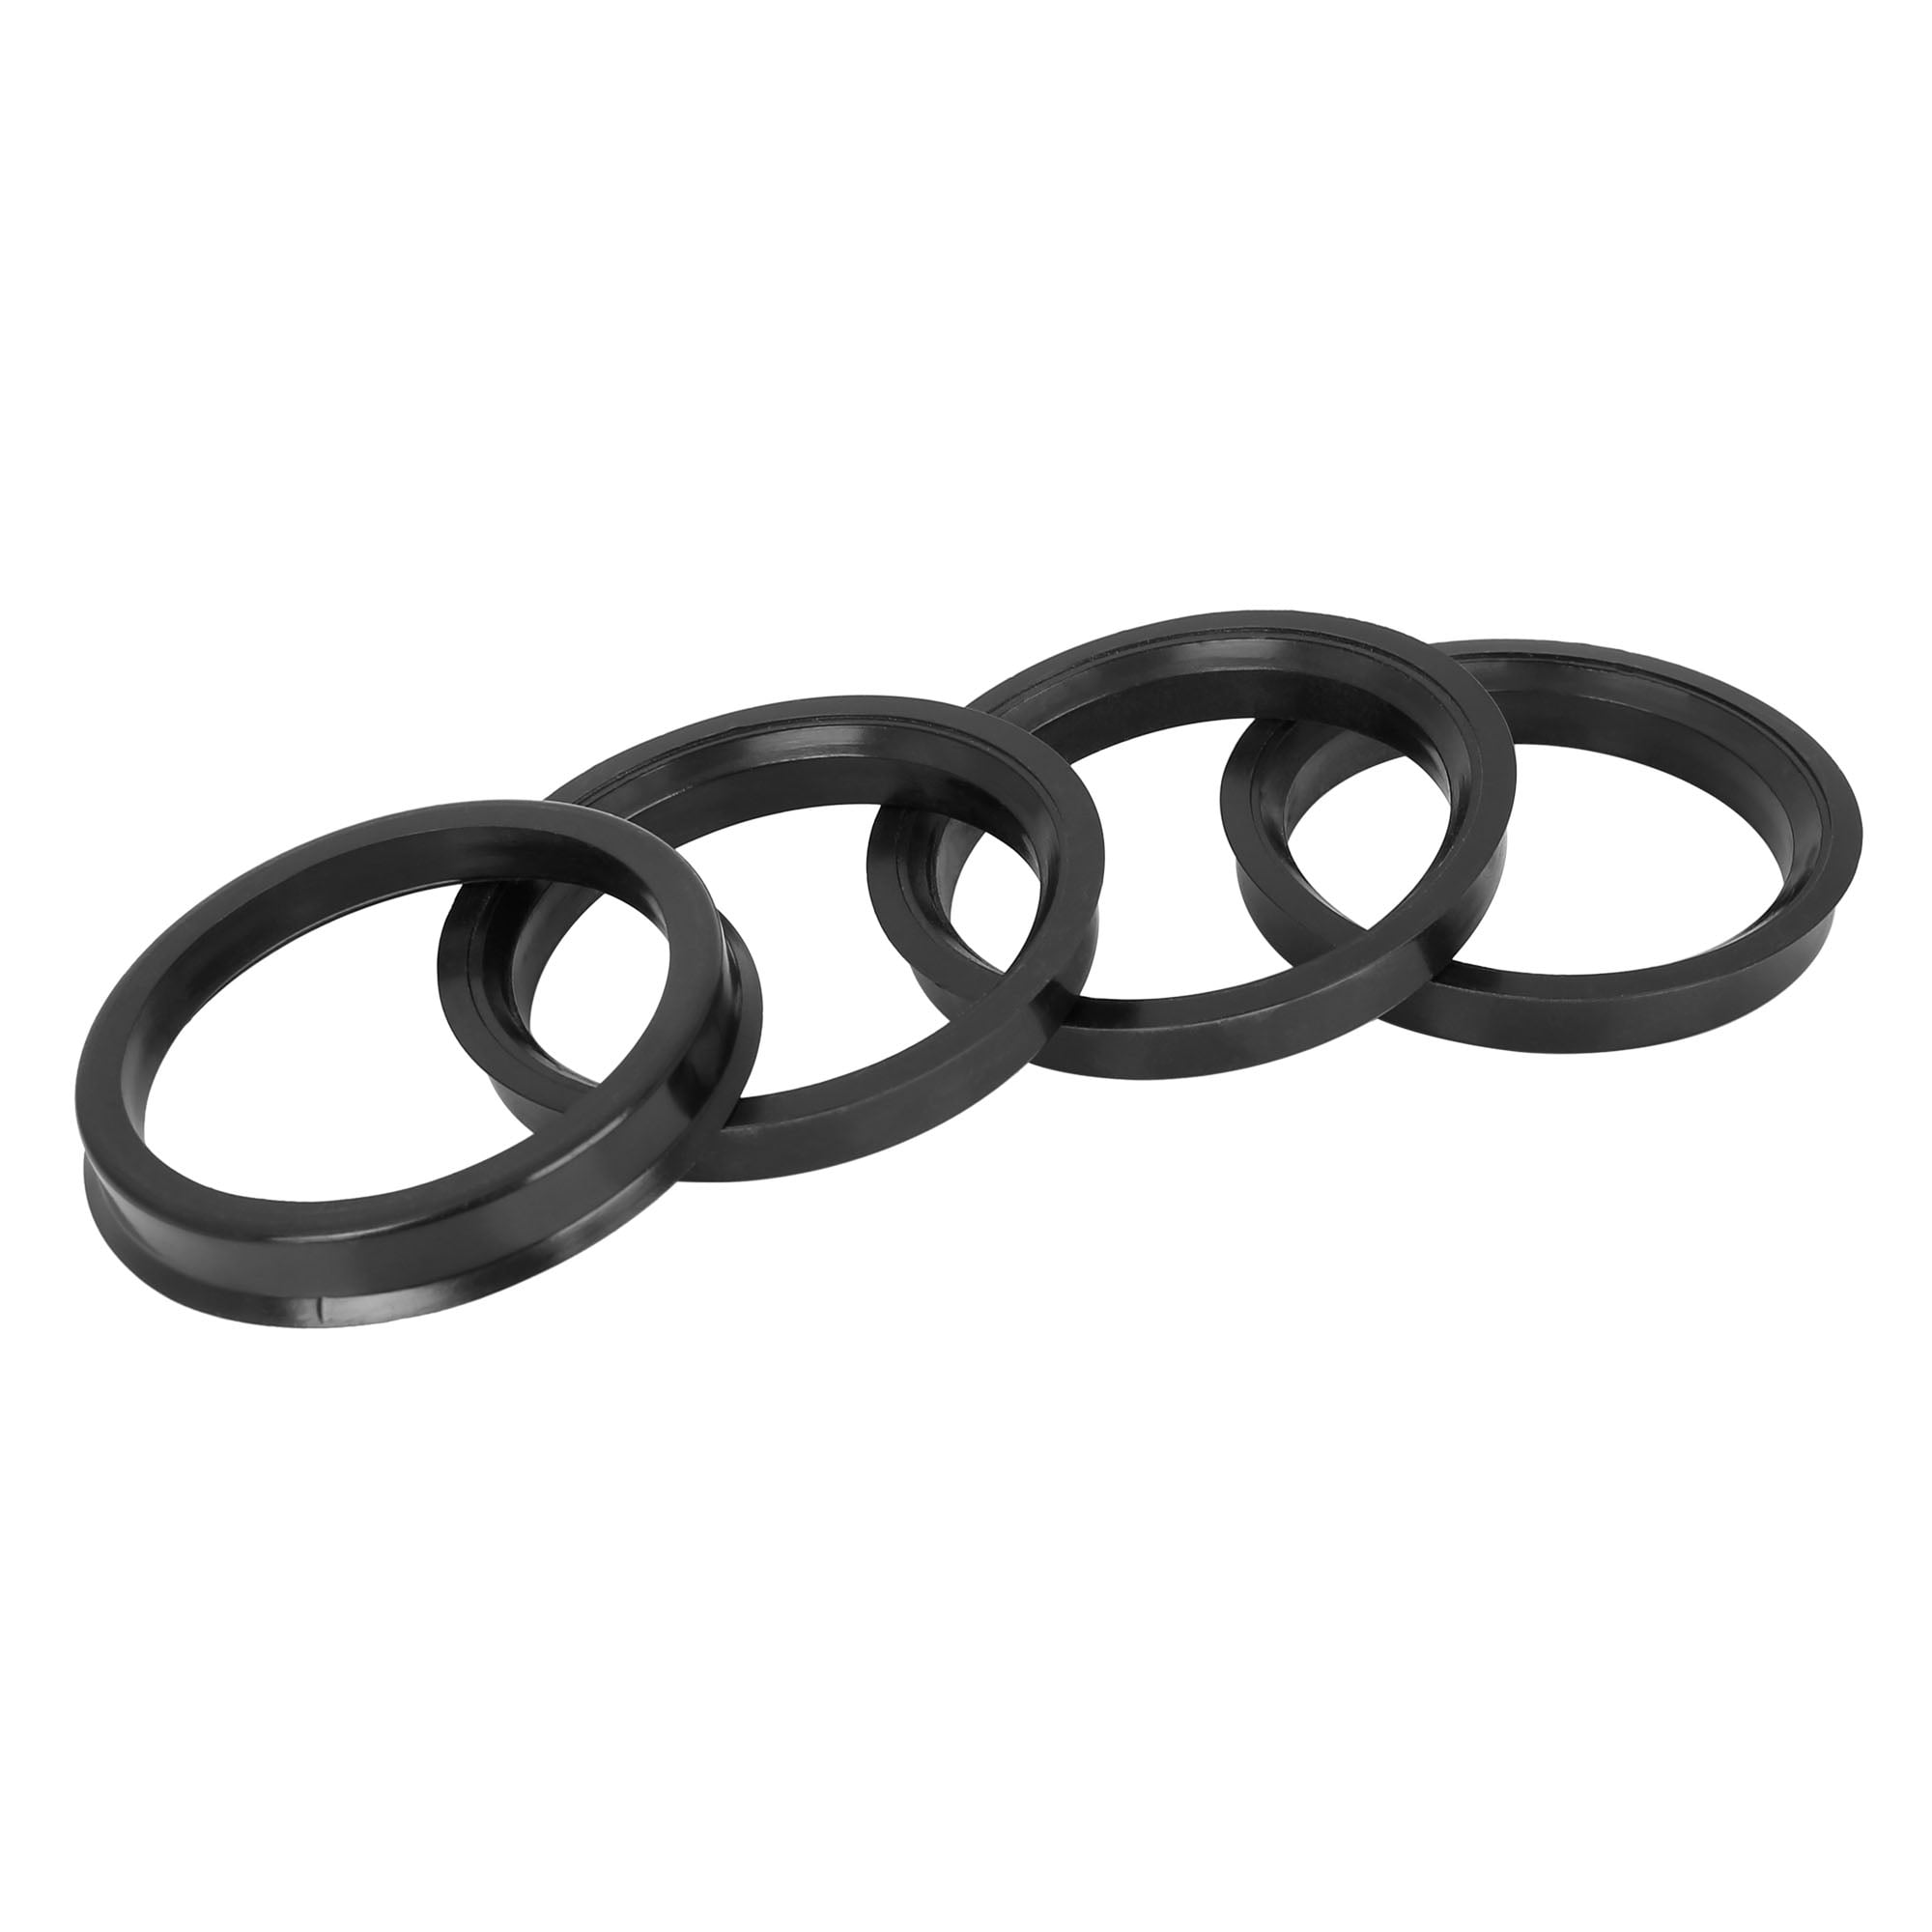 HUB CENTRIC RINGS 67.1 to 56.1mm SET of 4 RINGS WORLD LOW SHIPPING $ 67,1-56,1 